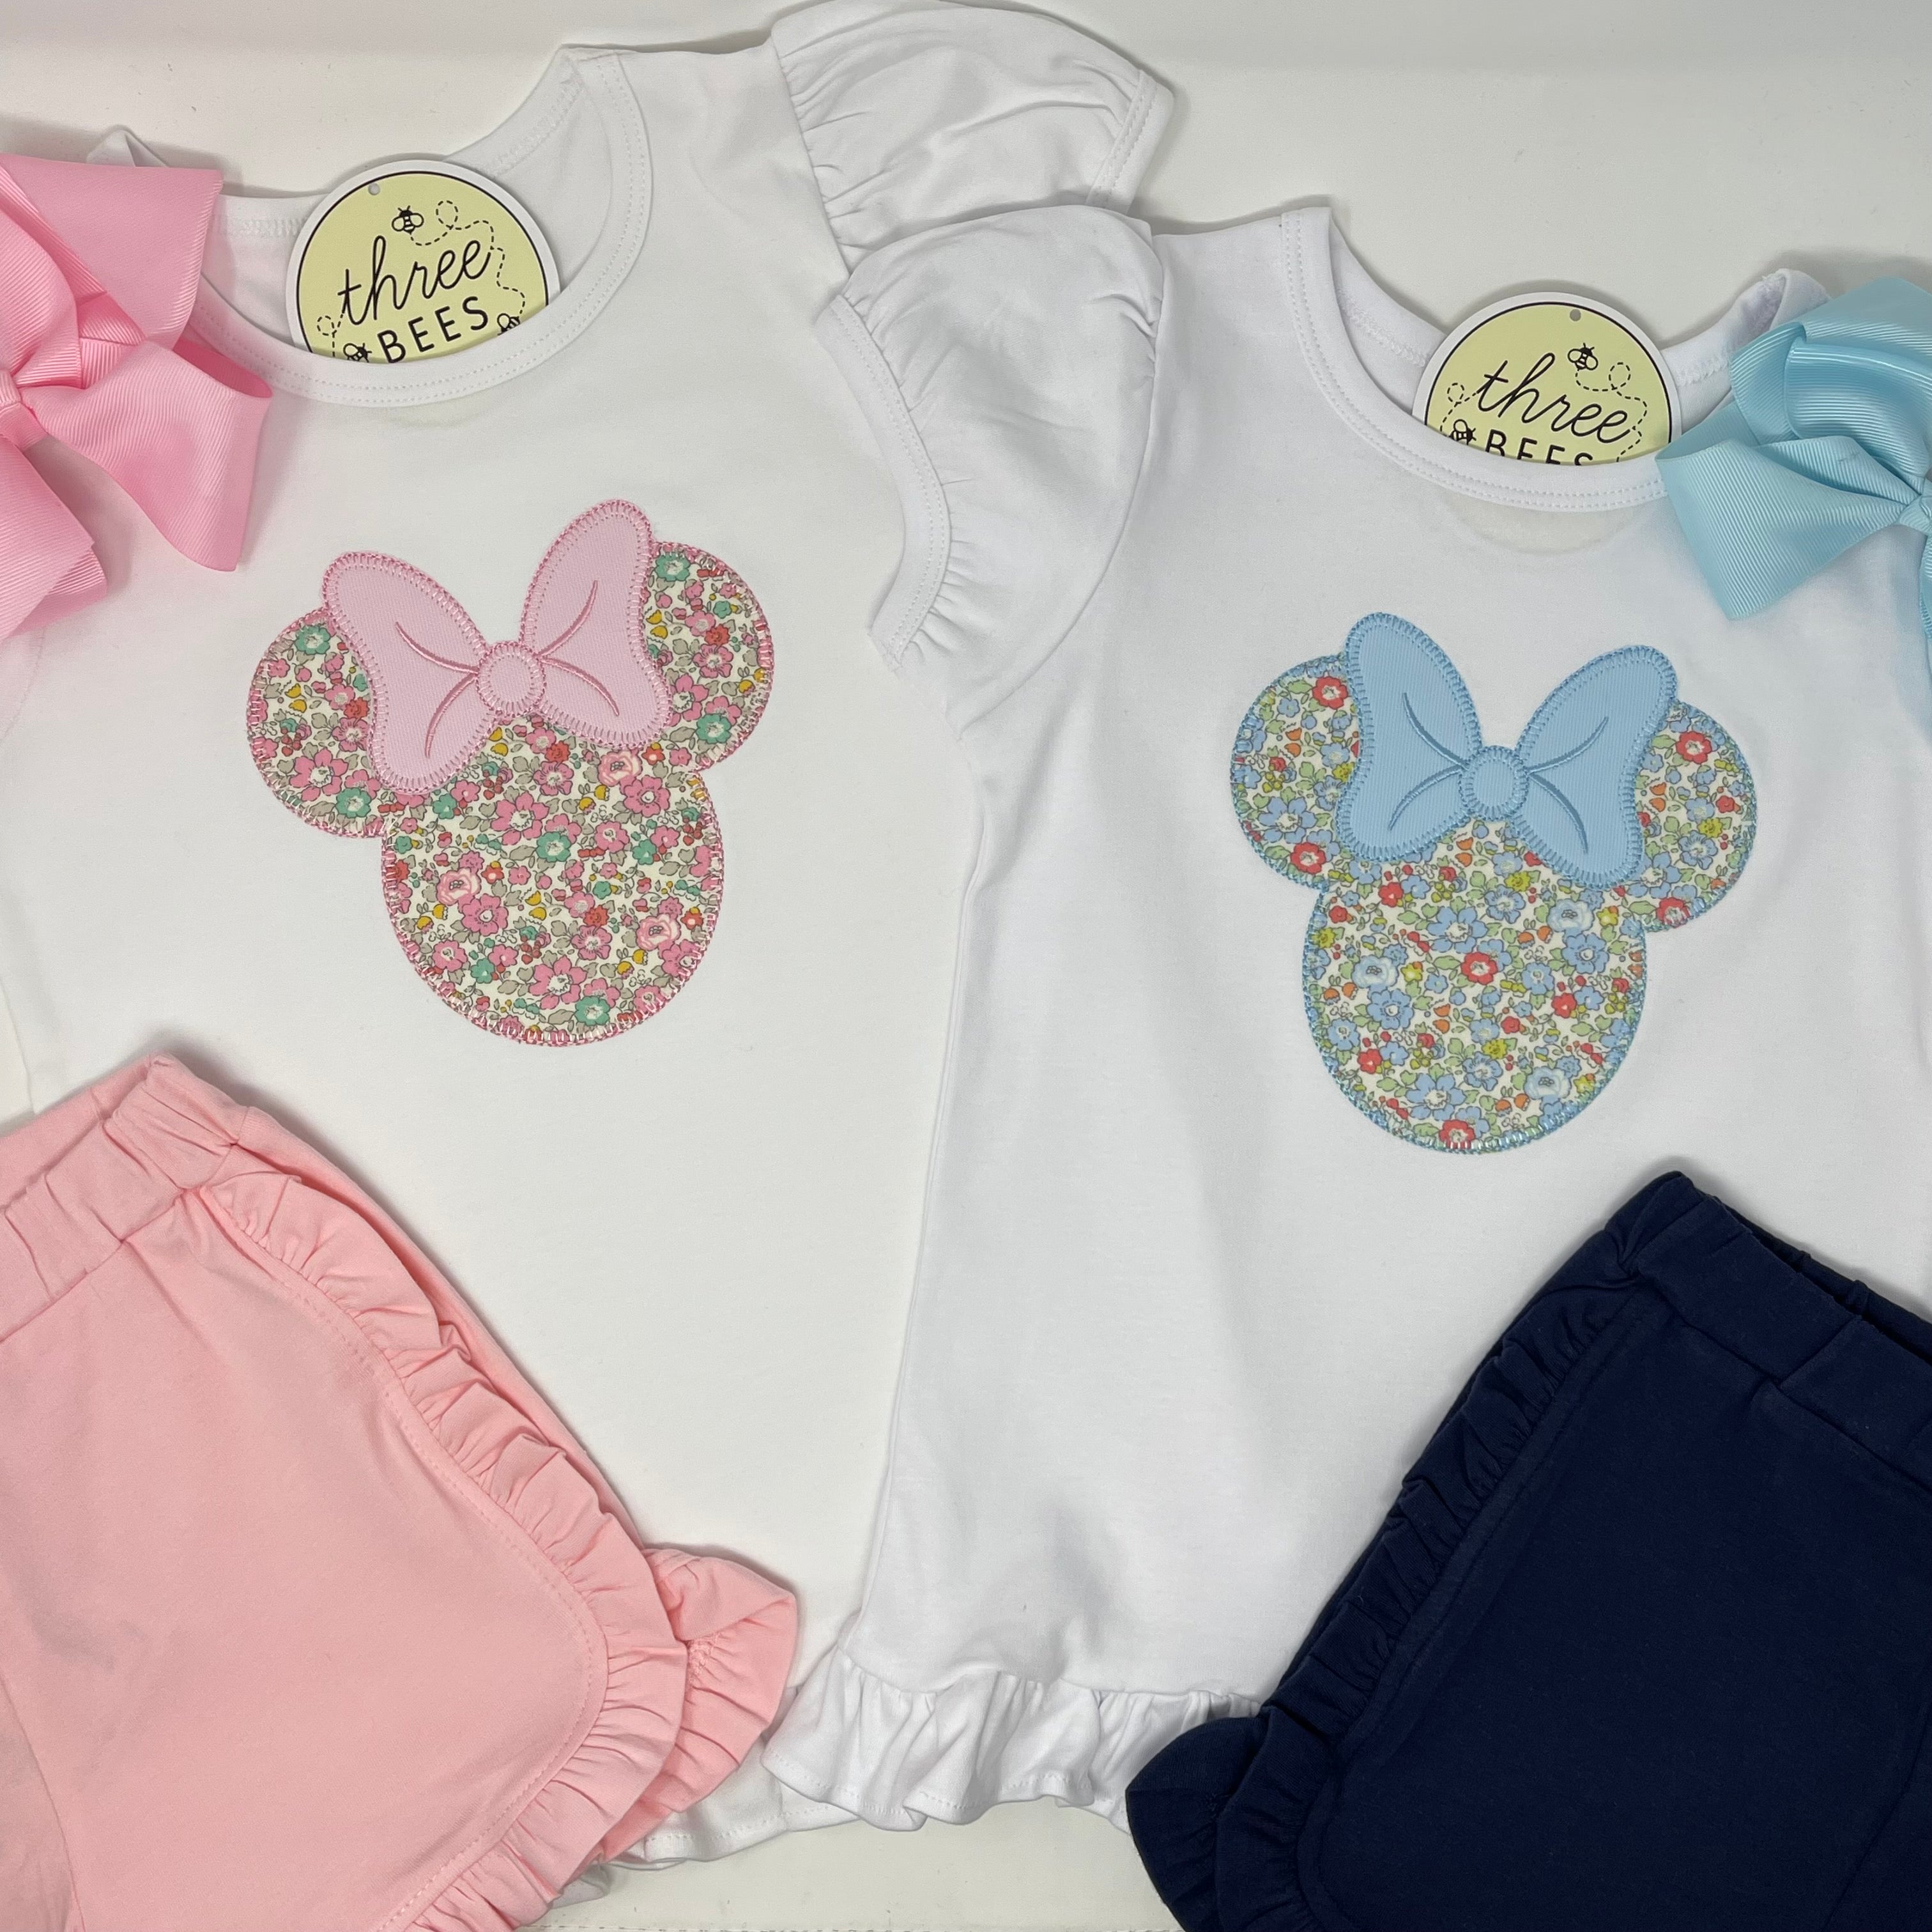 Classic Mouse Applique with Monogram Girls Top